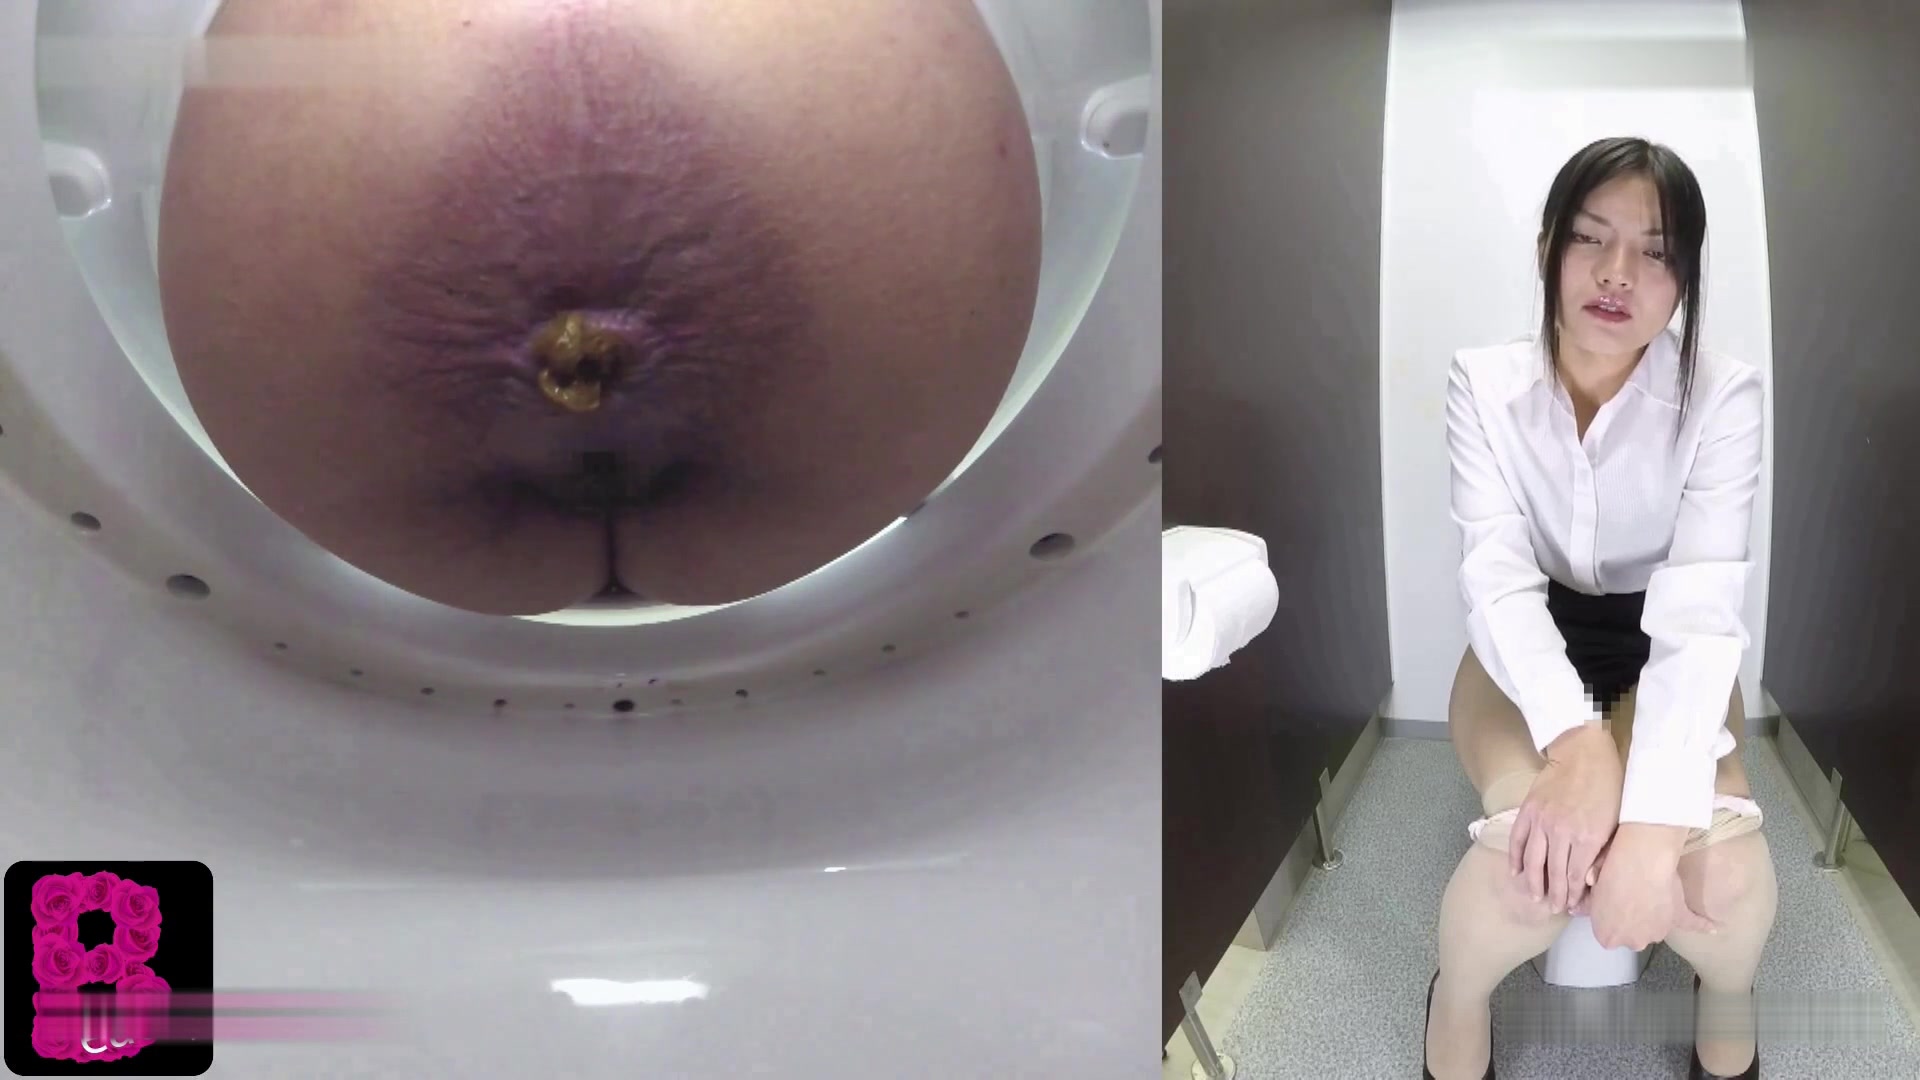 Toilet Cam Shit - Japanese toilet cam - video 3 - ScatFap.com - scat porn search - FREE  videos of extreme kaviar and copro sex, dirty shit eating and smearing